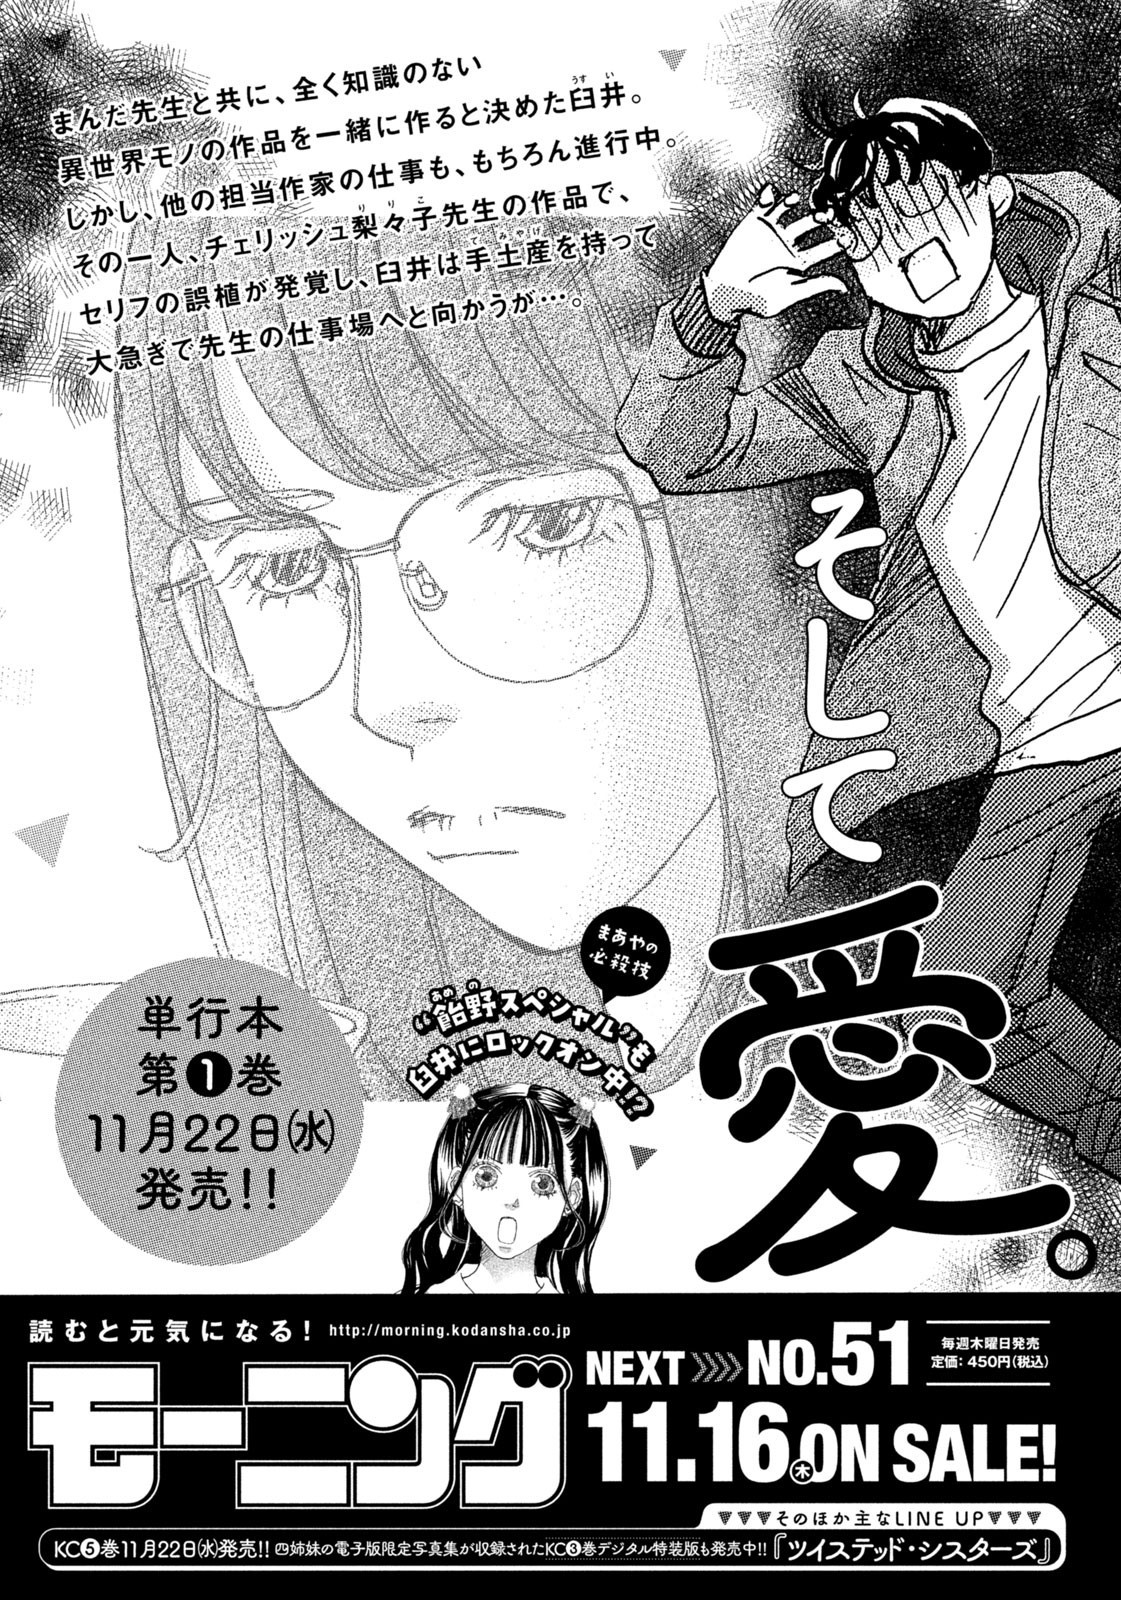 Weekly Morning - 週刊モーニング - Chapter 2023-50 - Page 452